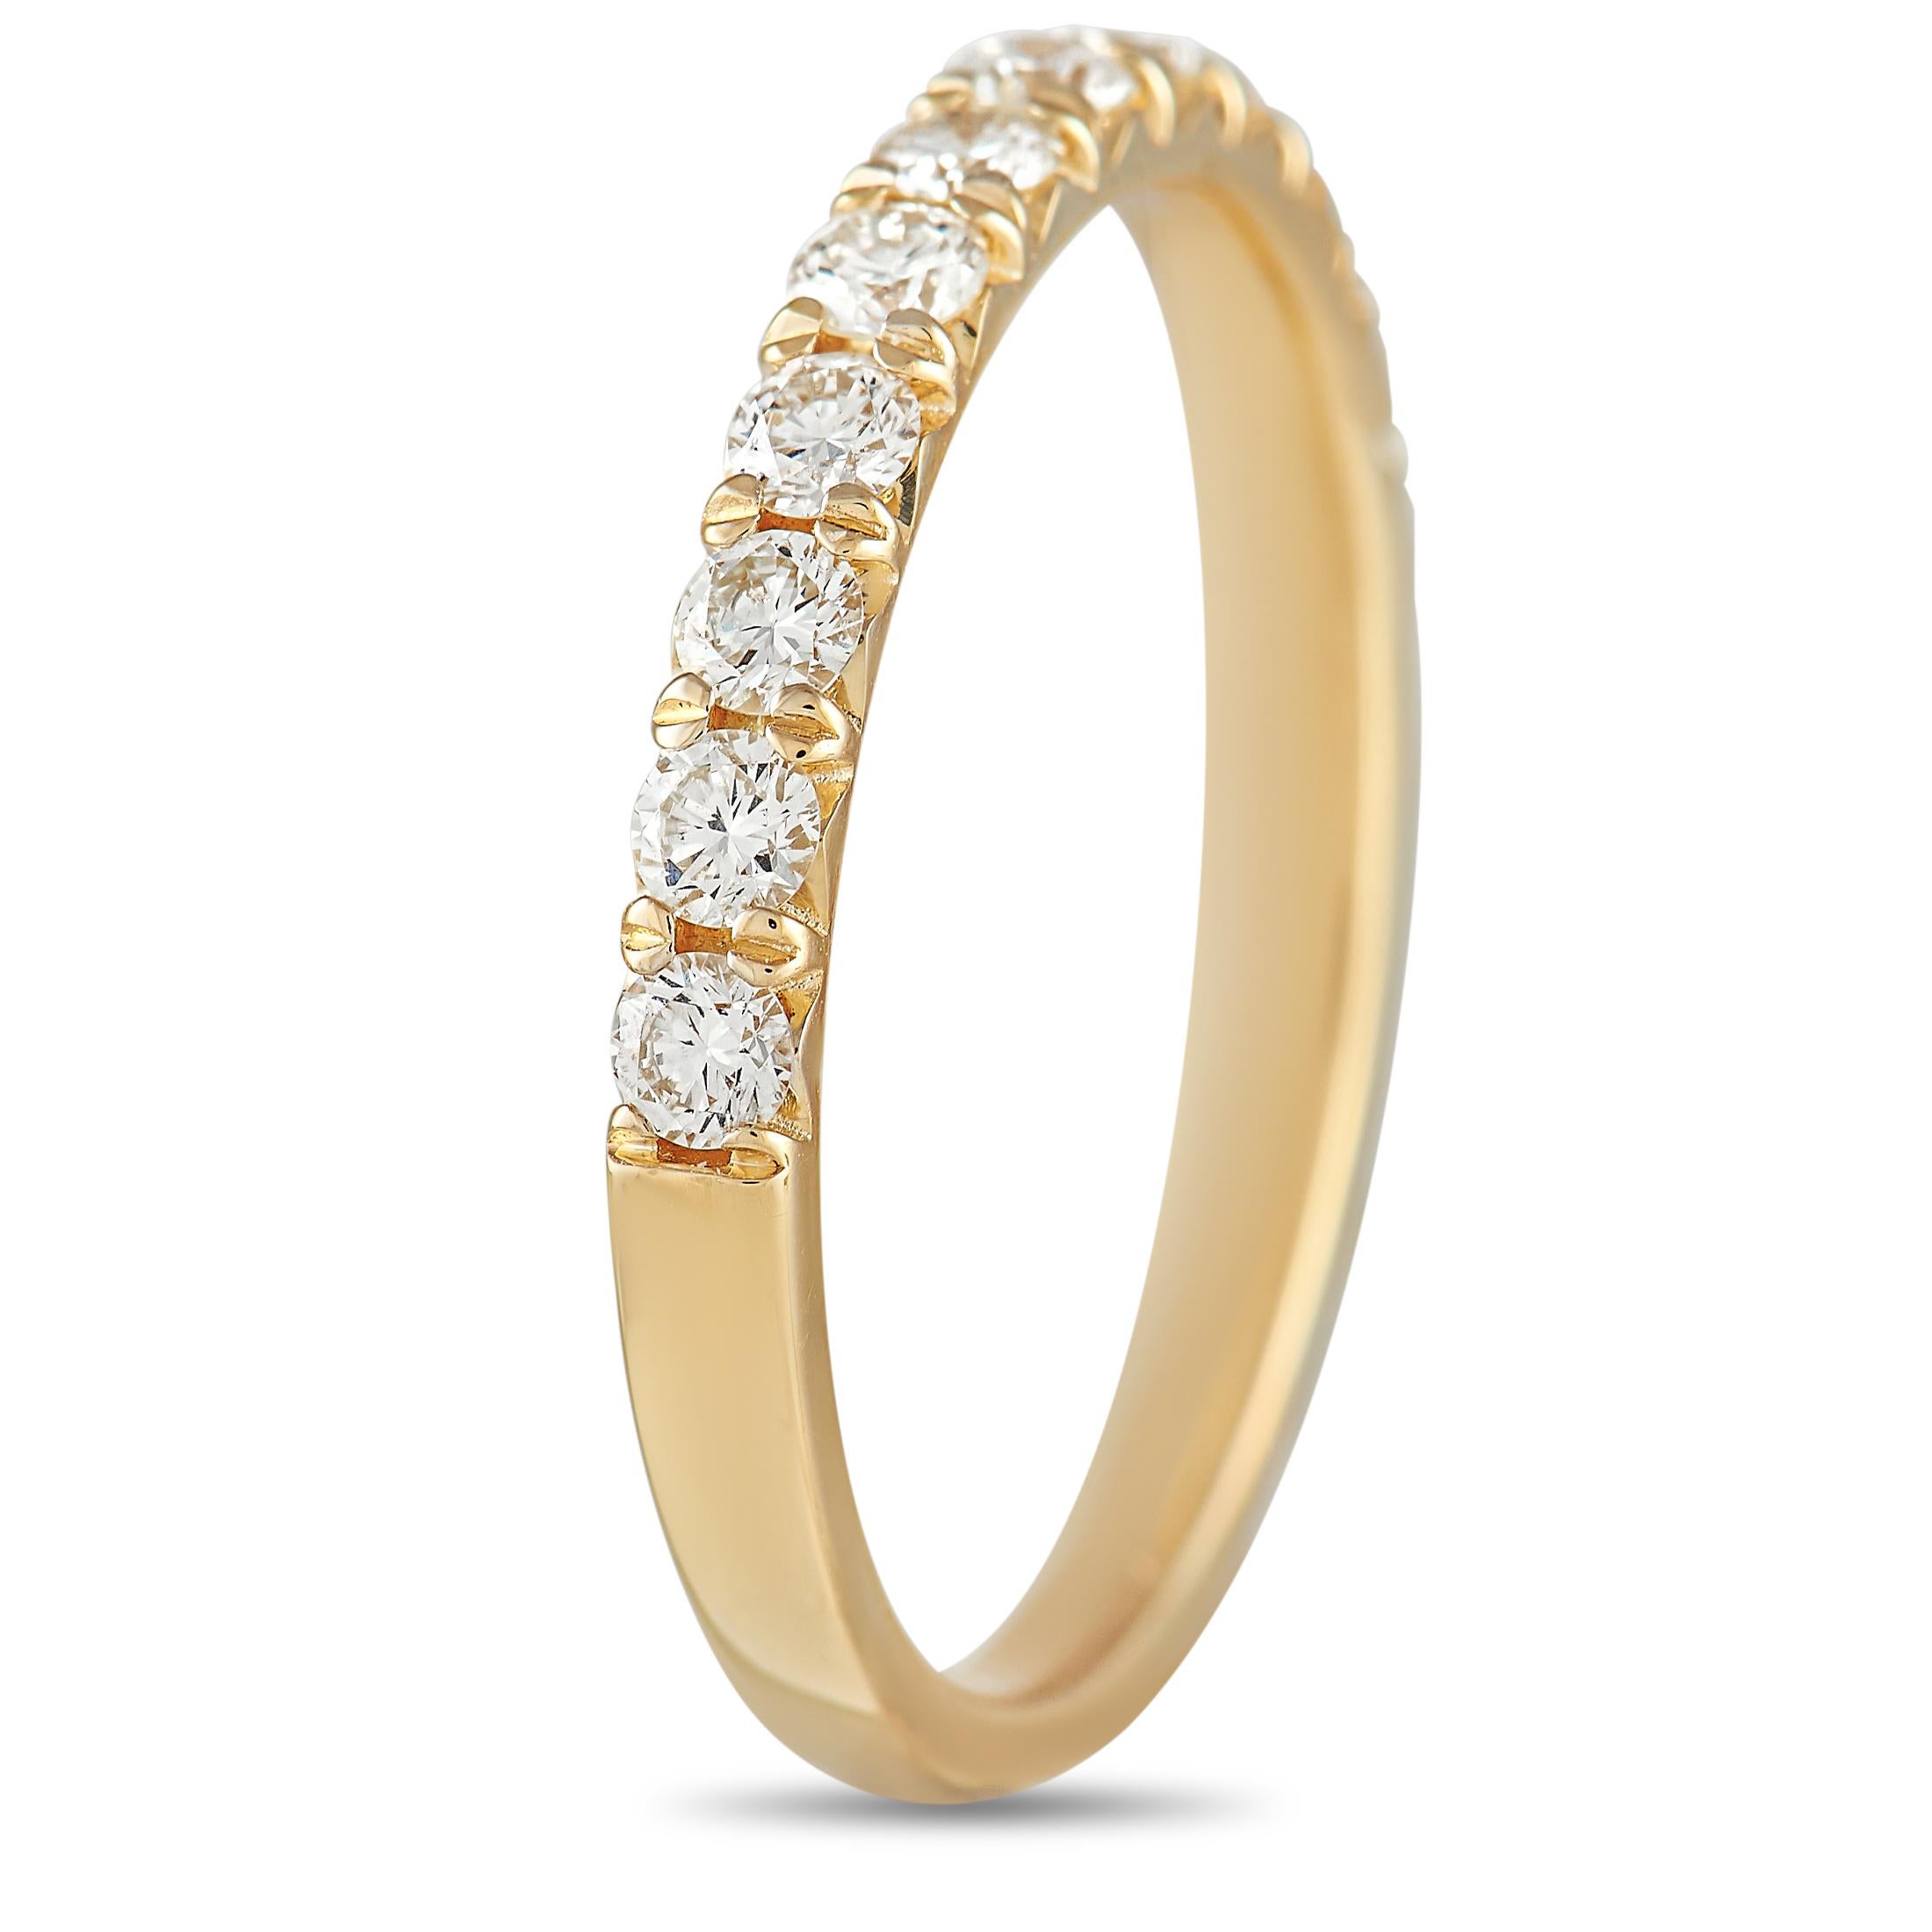 Opulent 18K Yellow Gold provides a stunning foundation for this elegant, understated ring. The 2mm wide band comes to life thanks to a series of sparkling diamonds with a total weight of 0.49 carats. A 2mm top height makes it a highly wearable piece